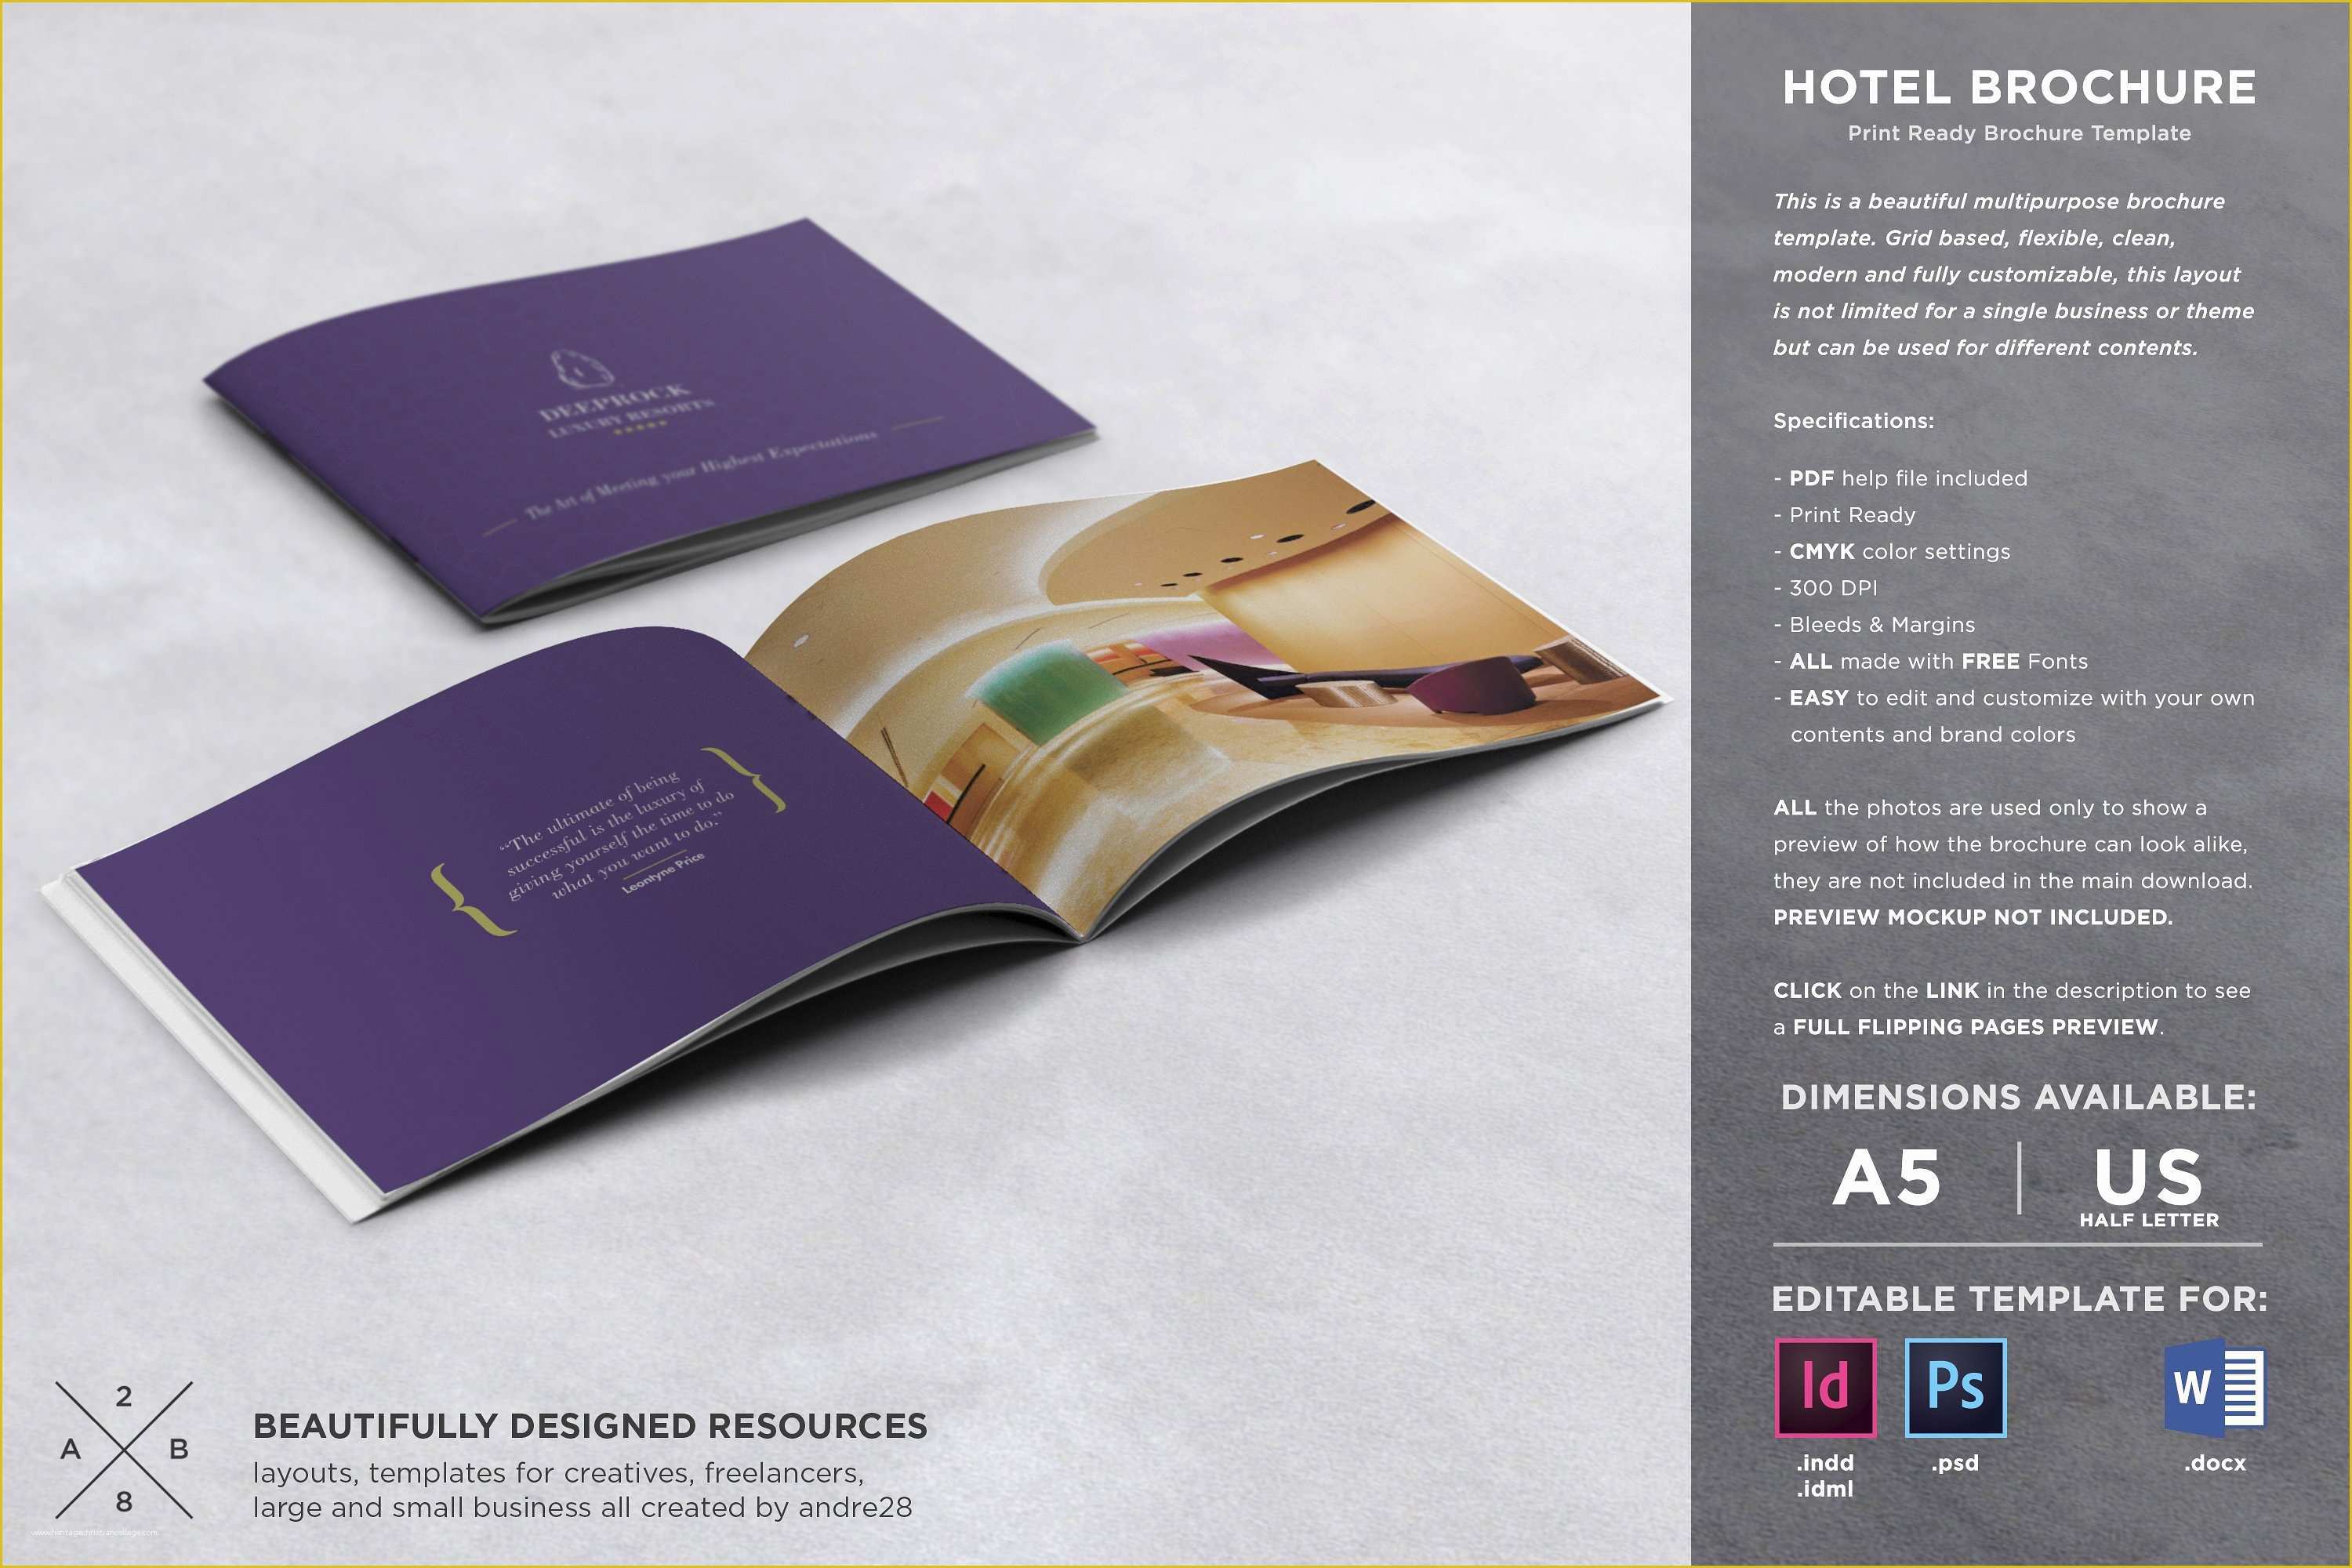 Free Templates for Flyers and Brochures Of Hotel Brochure Template Brochure Templates Creative Market